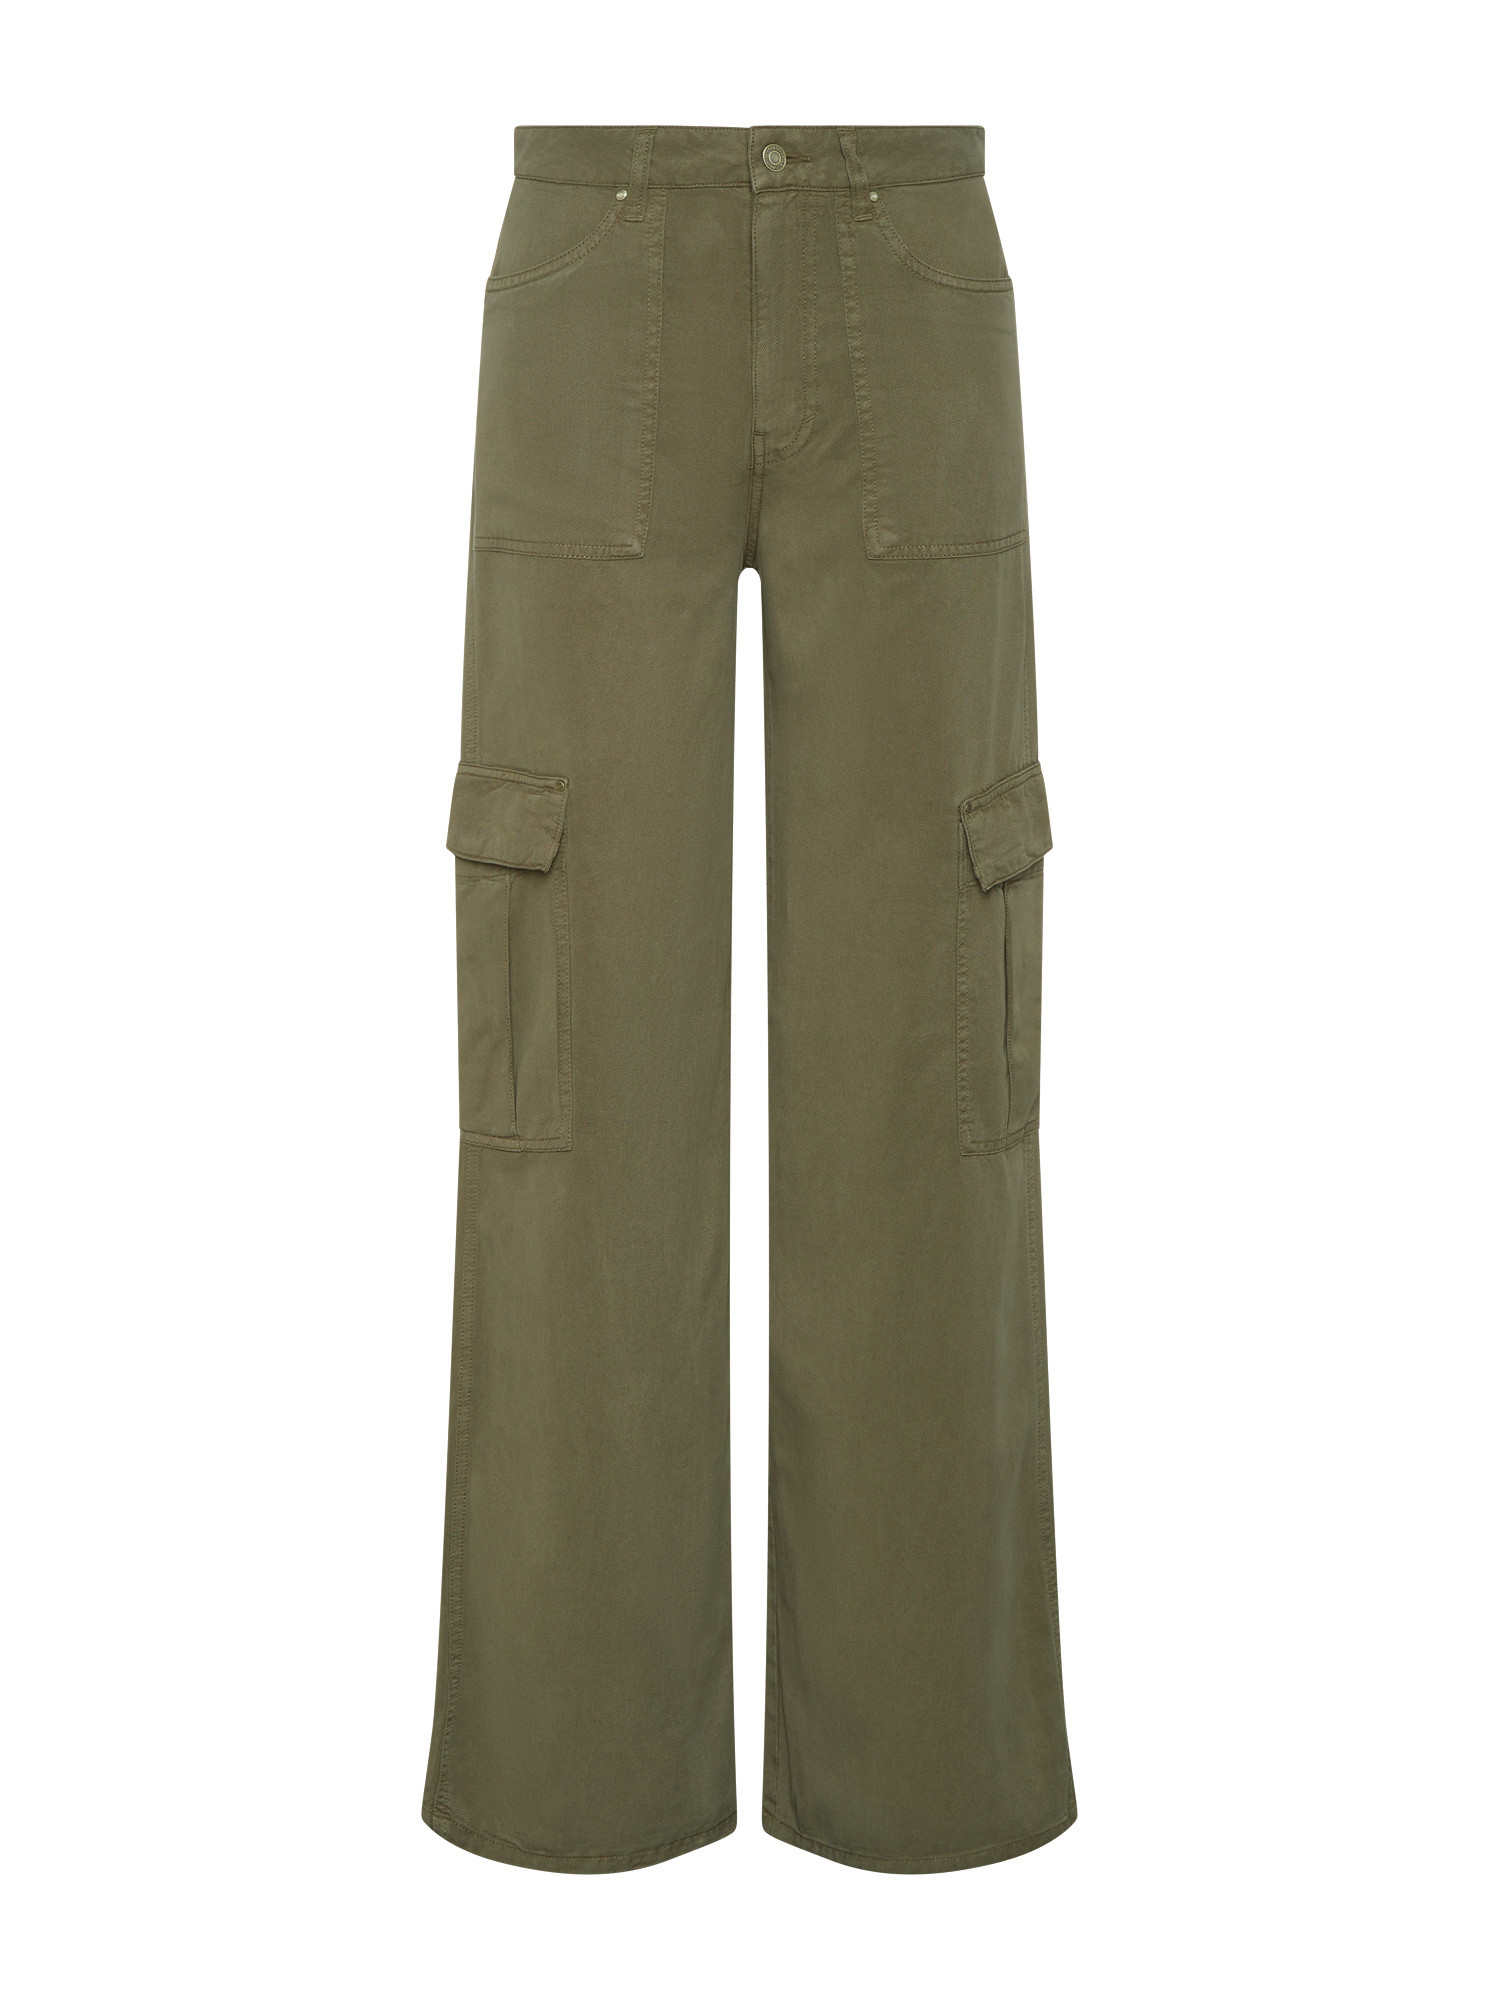 Guess - Cargo trousers, Olive Green, large image number 0